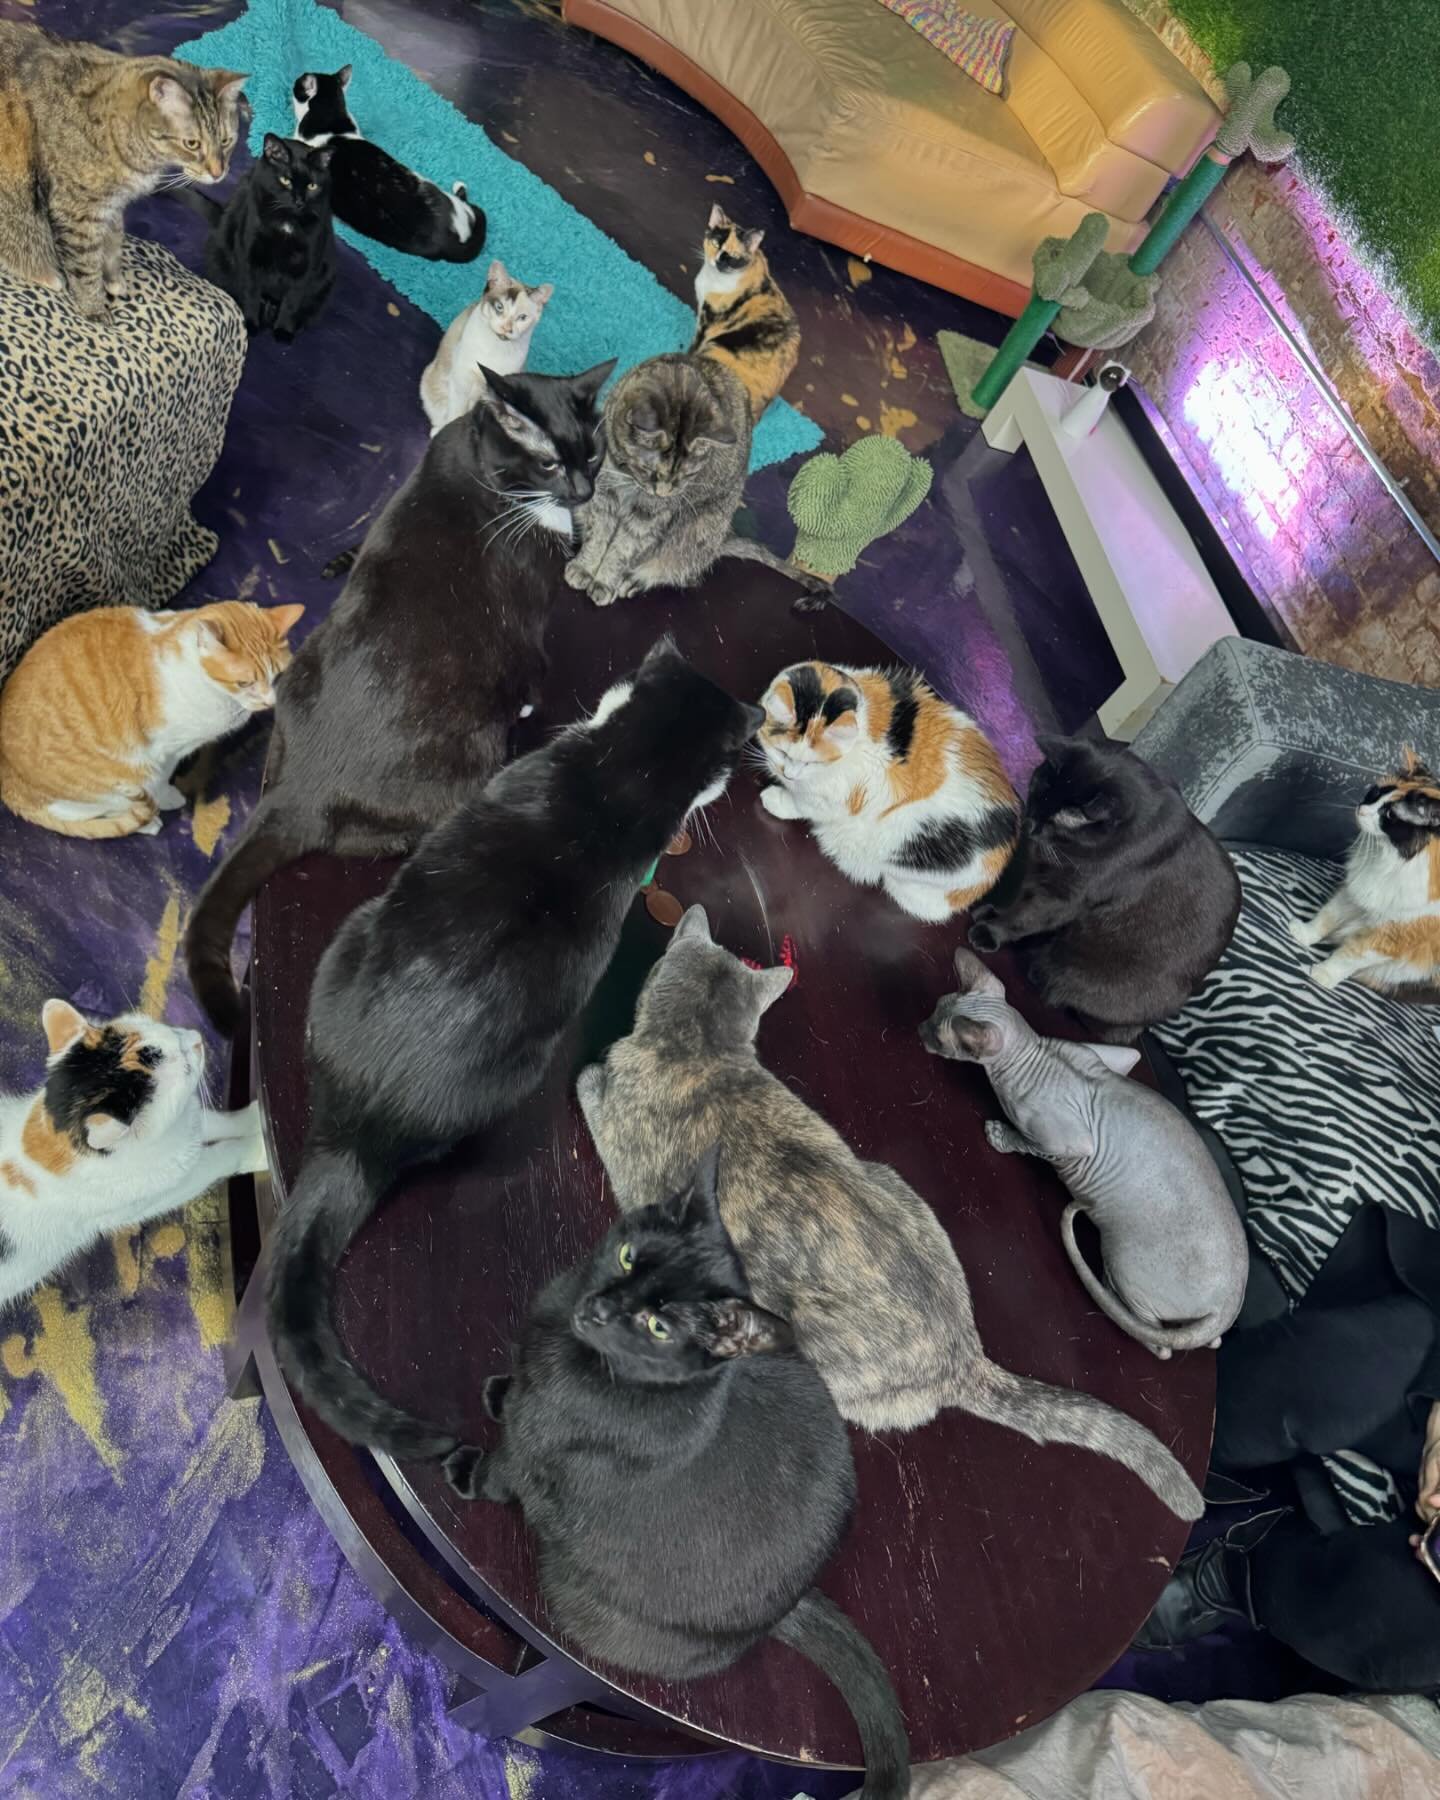 TFW resident cats also have team meetings. Gotta prepare to give the best CATxperience! 

We open at 11:11am. Come study with them, work next to them, or just relax and enjoy their company 😻

Coffee, tea, kombucha, and other refreshing drinks on the